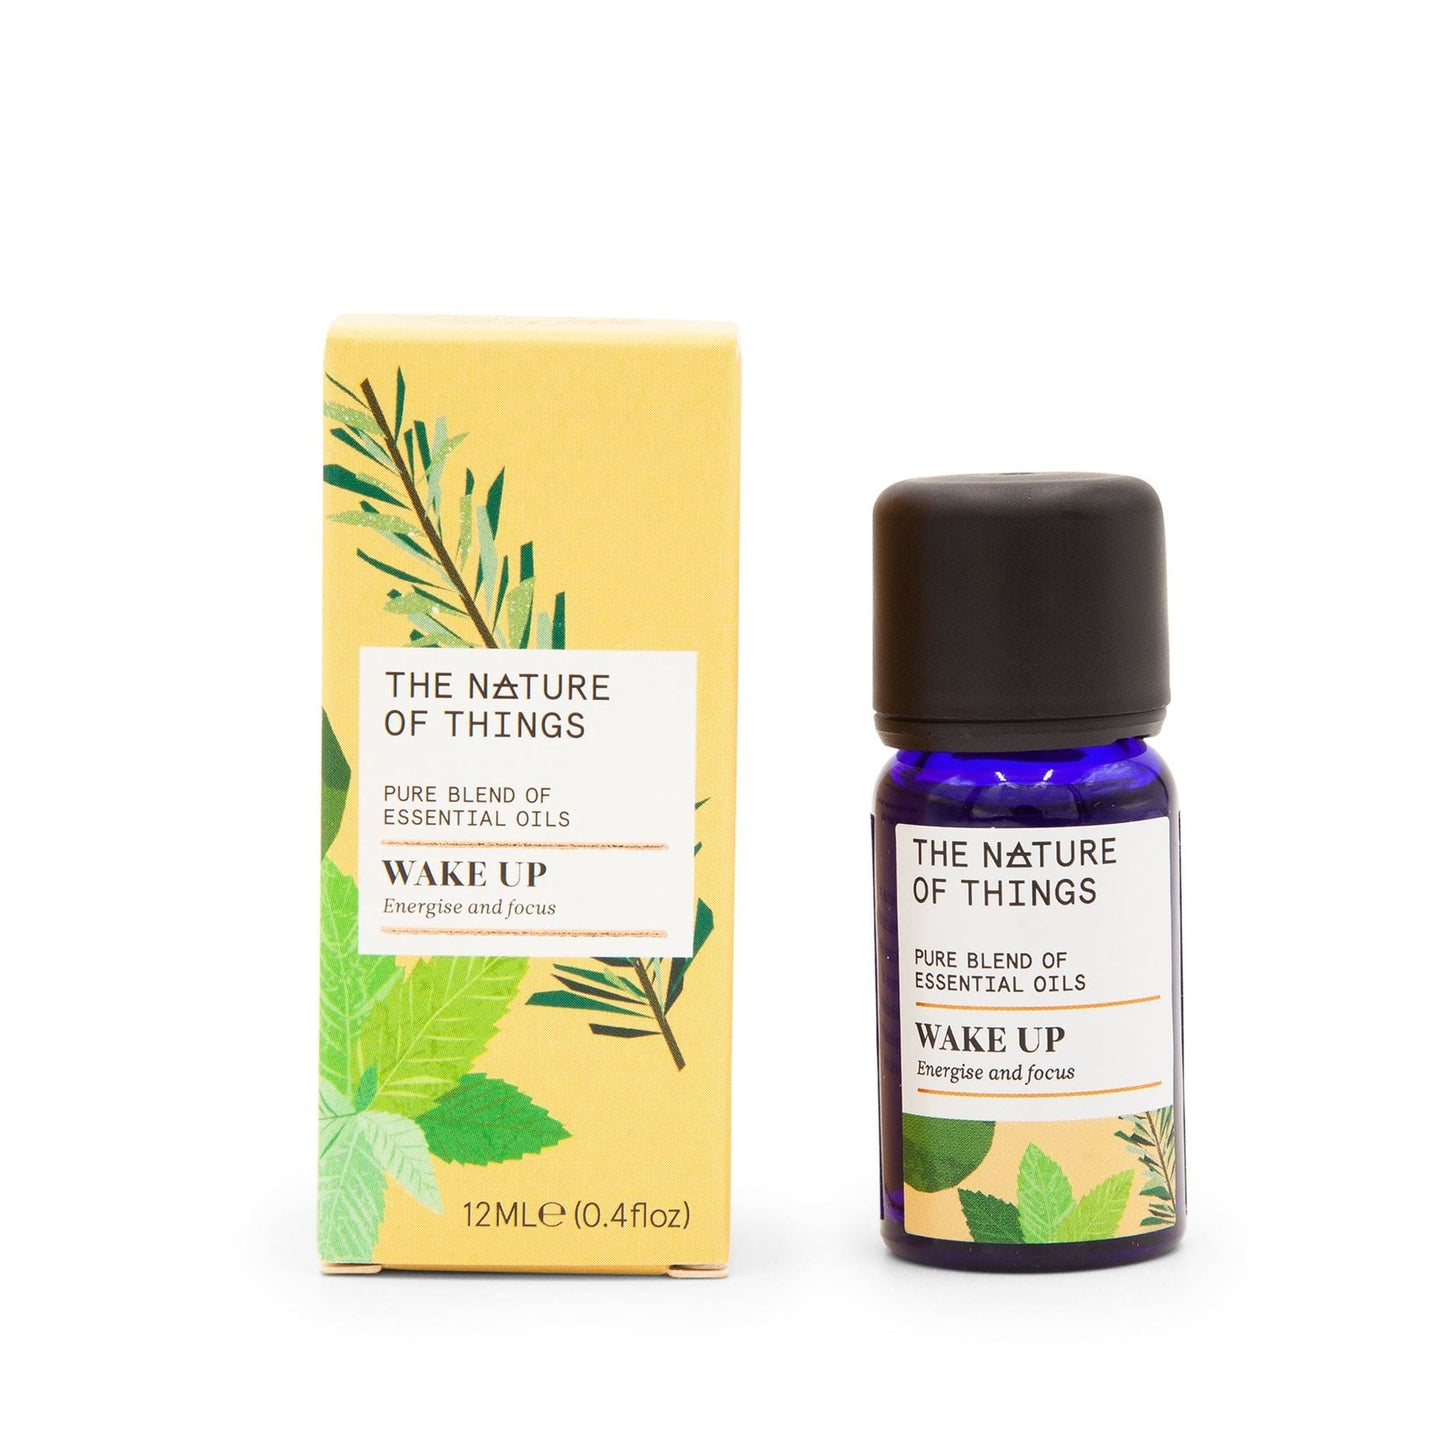 The Nature of Things Essential Oil Wake Up Essential Oil Blend 12ml - The Nature of Things